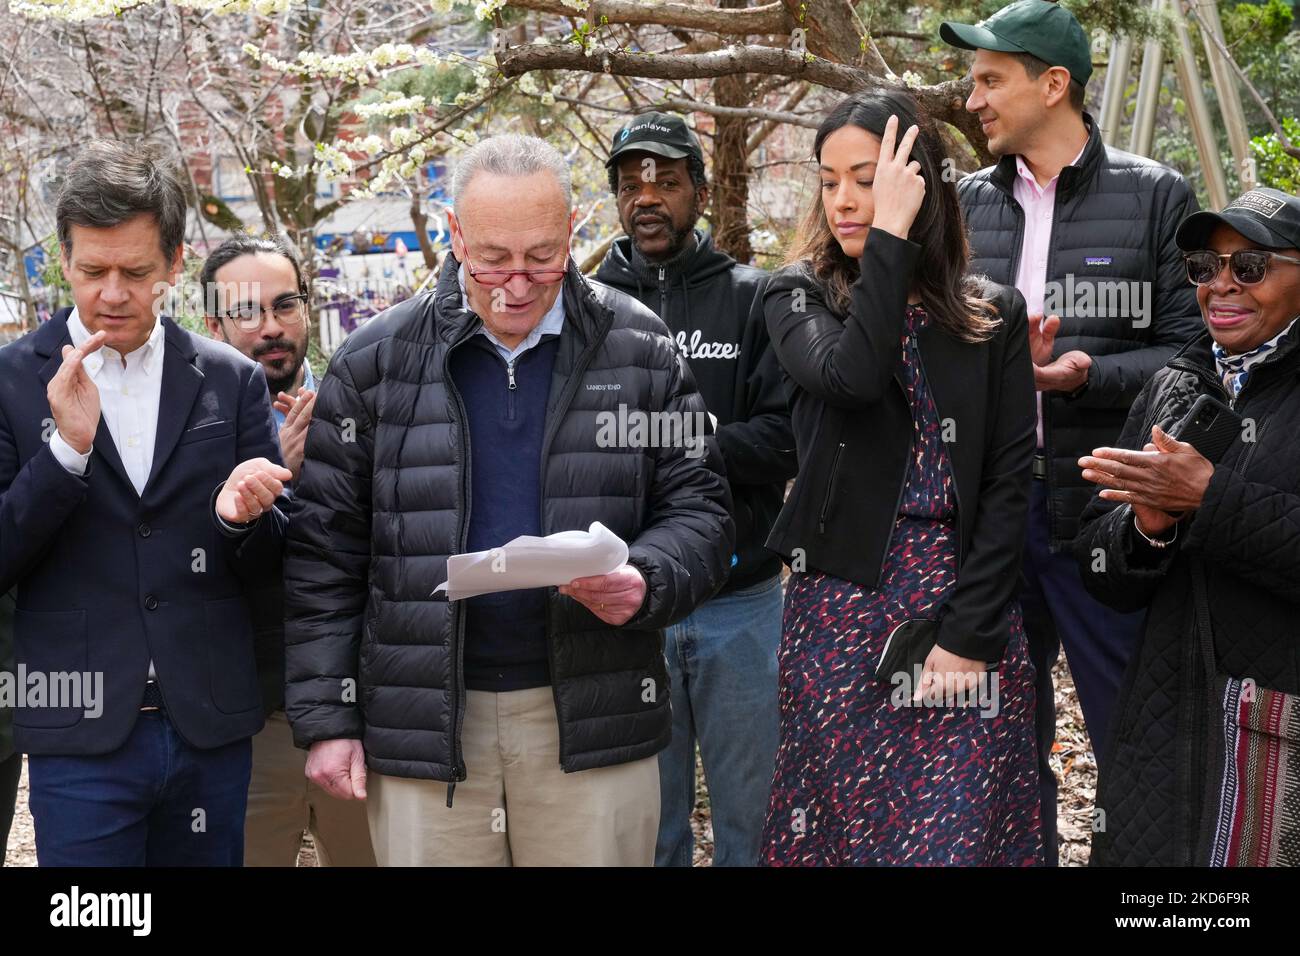 Senator Schumer, local elected officials, community garden advocates from across NYC, New Yorkers 4 Parks and climate advocates visit La Plaza Cultural in East Village to announce USDA program funded in the Bipartisan Infrastructure Law that will support community gardens on April 1, 2022 in New York City, USA. (Photo by John Nacion/NurPhoto) Stock Photo